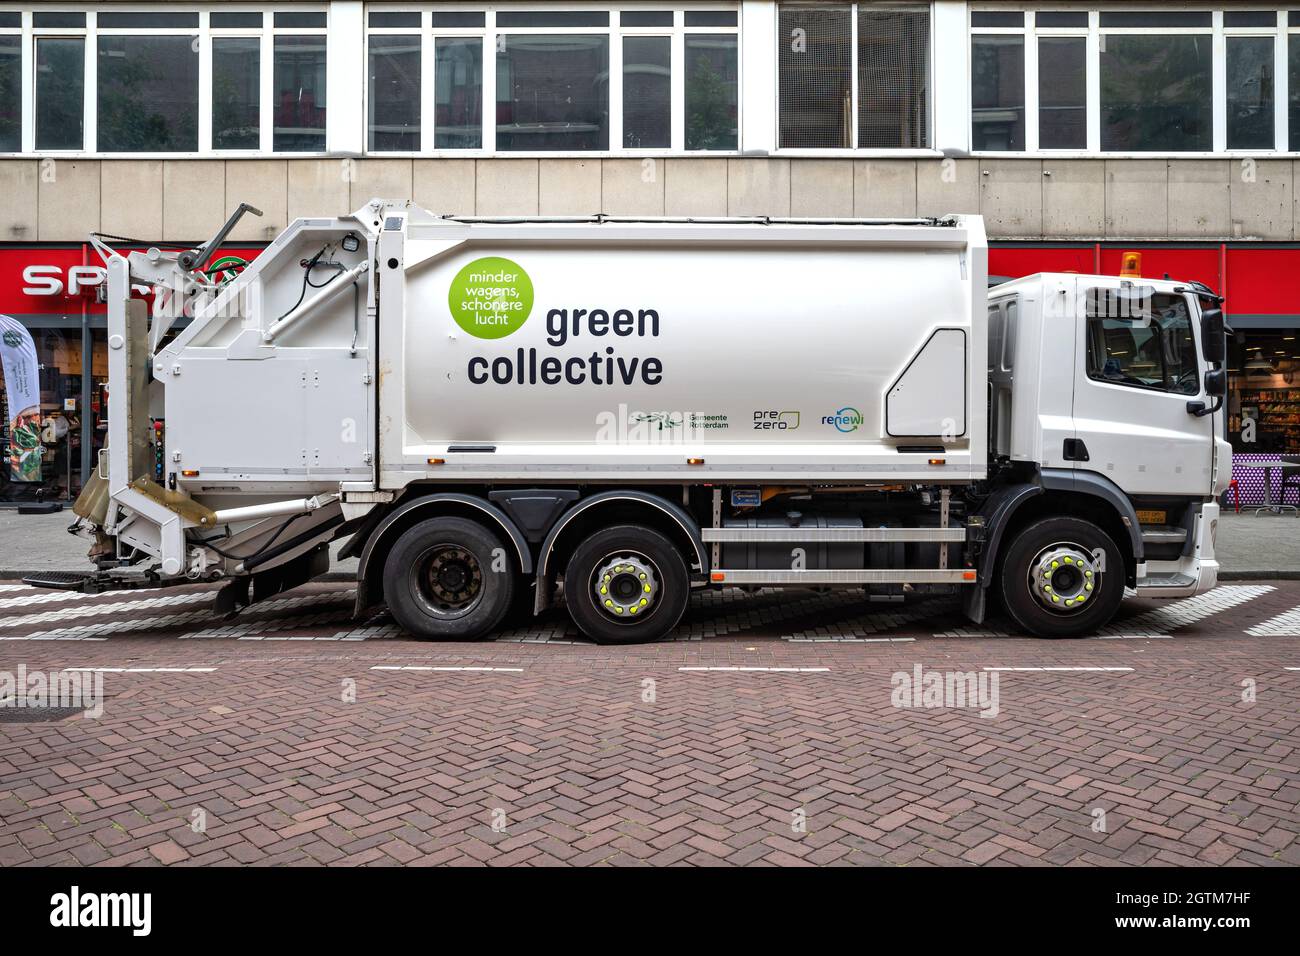 green collective garbage truck Stock Photo